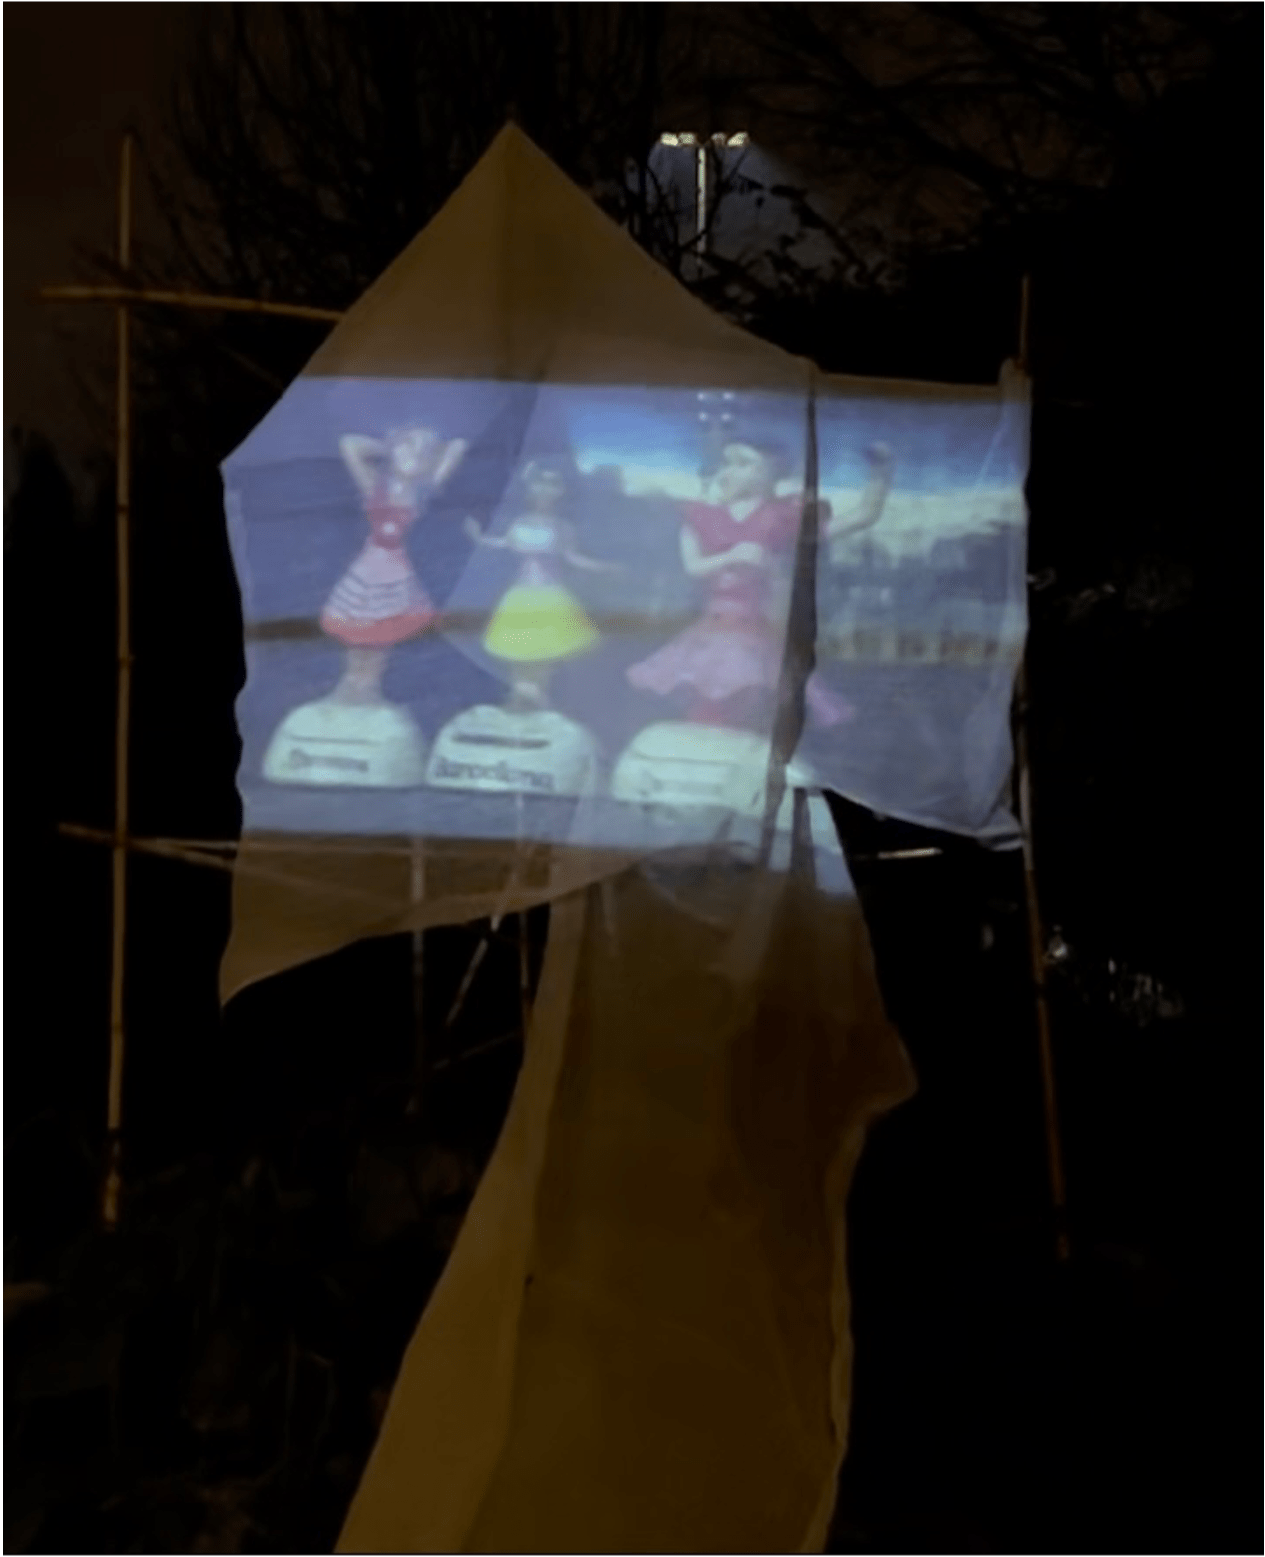 A projection on a sheet in a garden depicts a photo of a car dashboard. Three kitsch bobble-figurines of women sit on the dashboard with a name of a different city below them. 